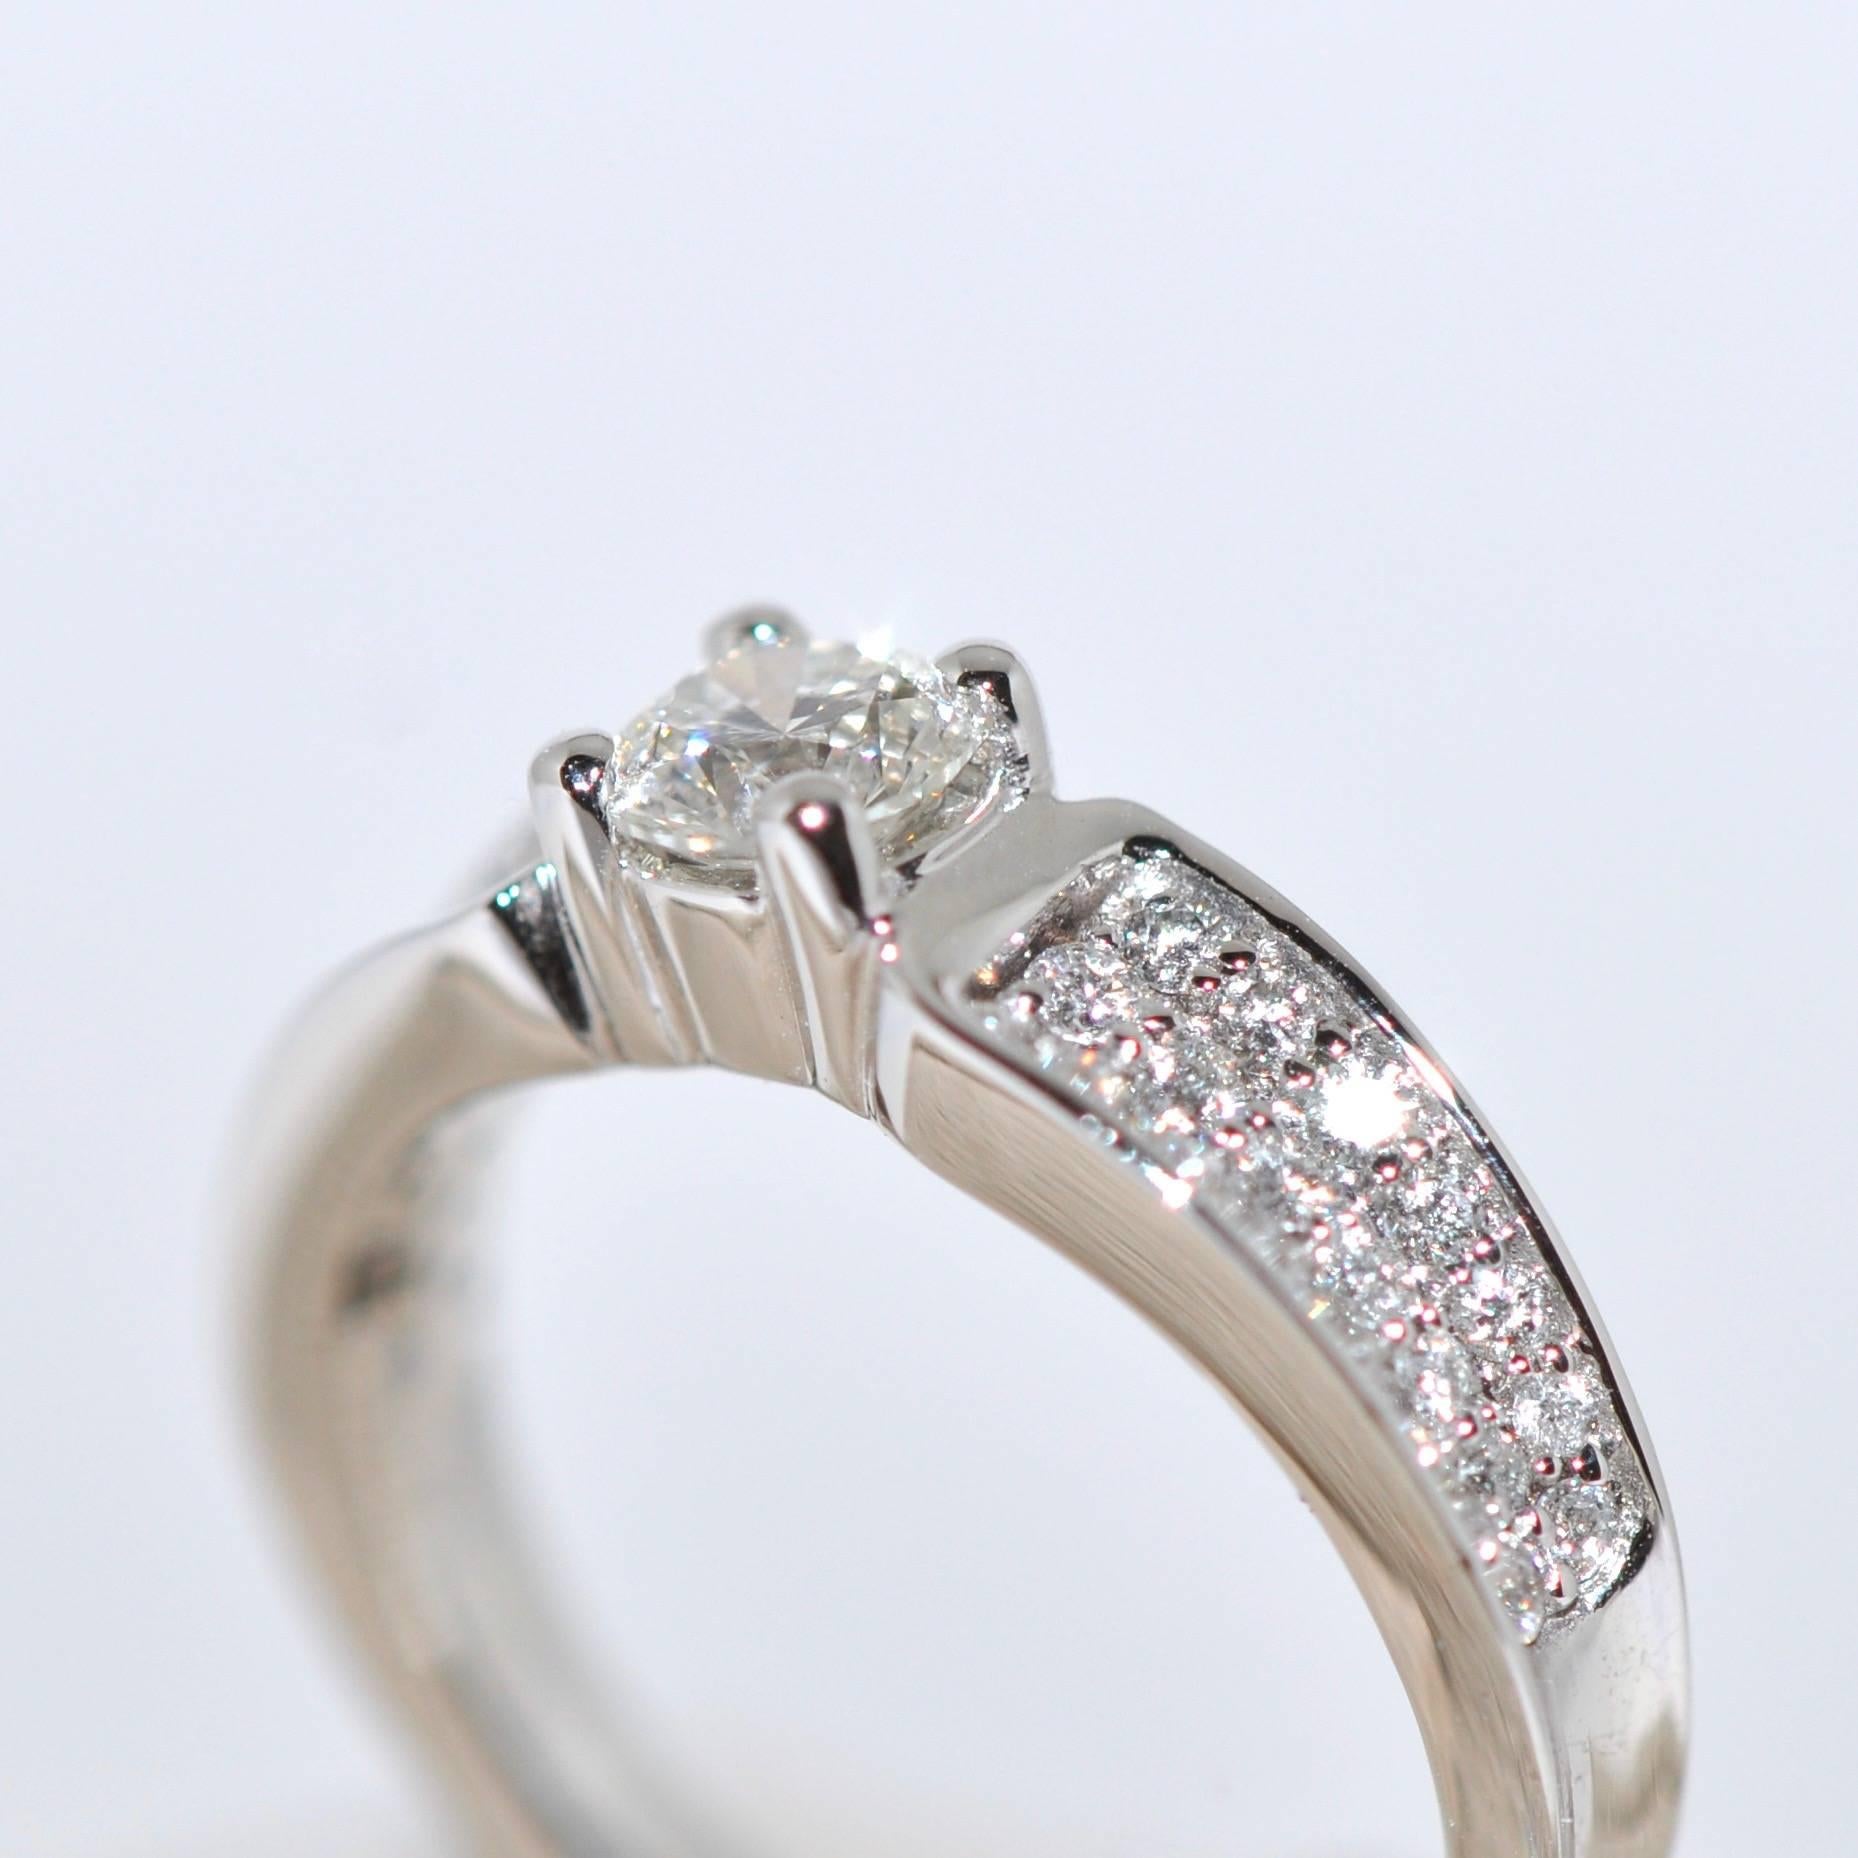 Discover this White Diamonds and White Gold 18 Carat Engagement Ring.
41 Brilliant White Diamonds 0.49 Carat Color H Purity SI
White Center Diamond 0.46 Carat Color H
White Gold 18 Carat
French Size 53
US Size 6 1/4

